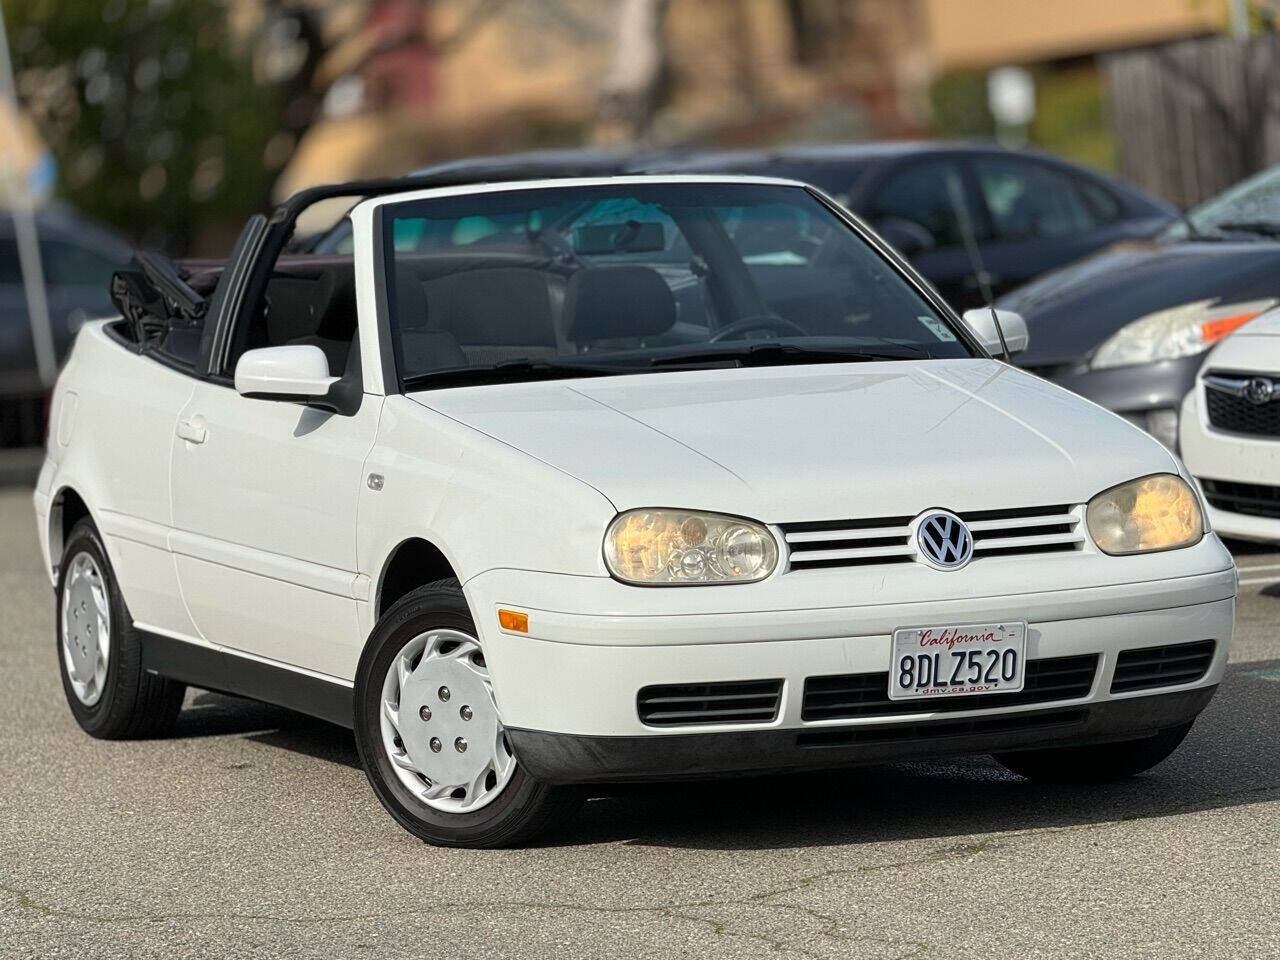 Volkswagen Cabrio For Sale In Raytown, MO - ®